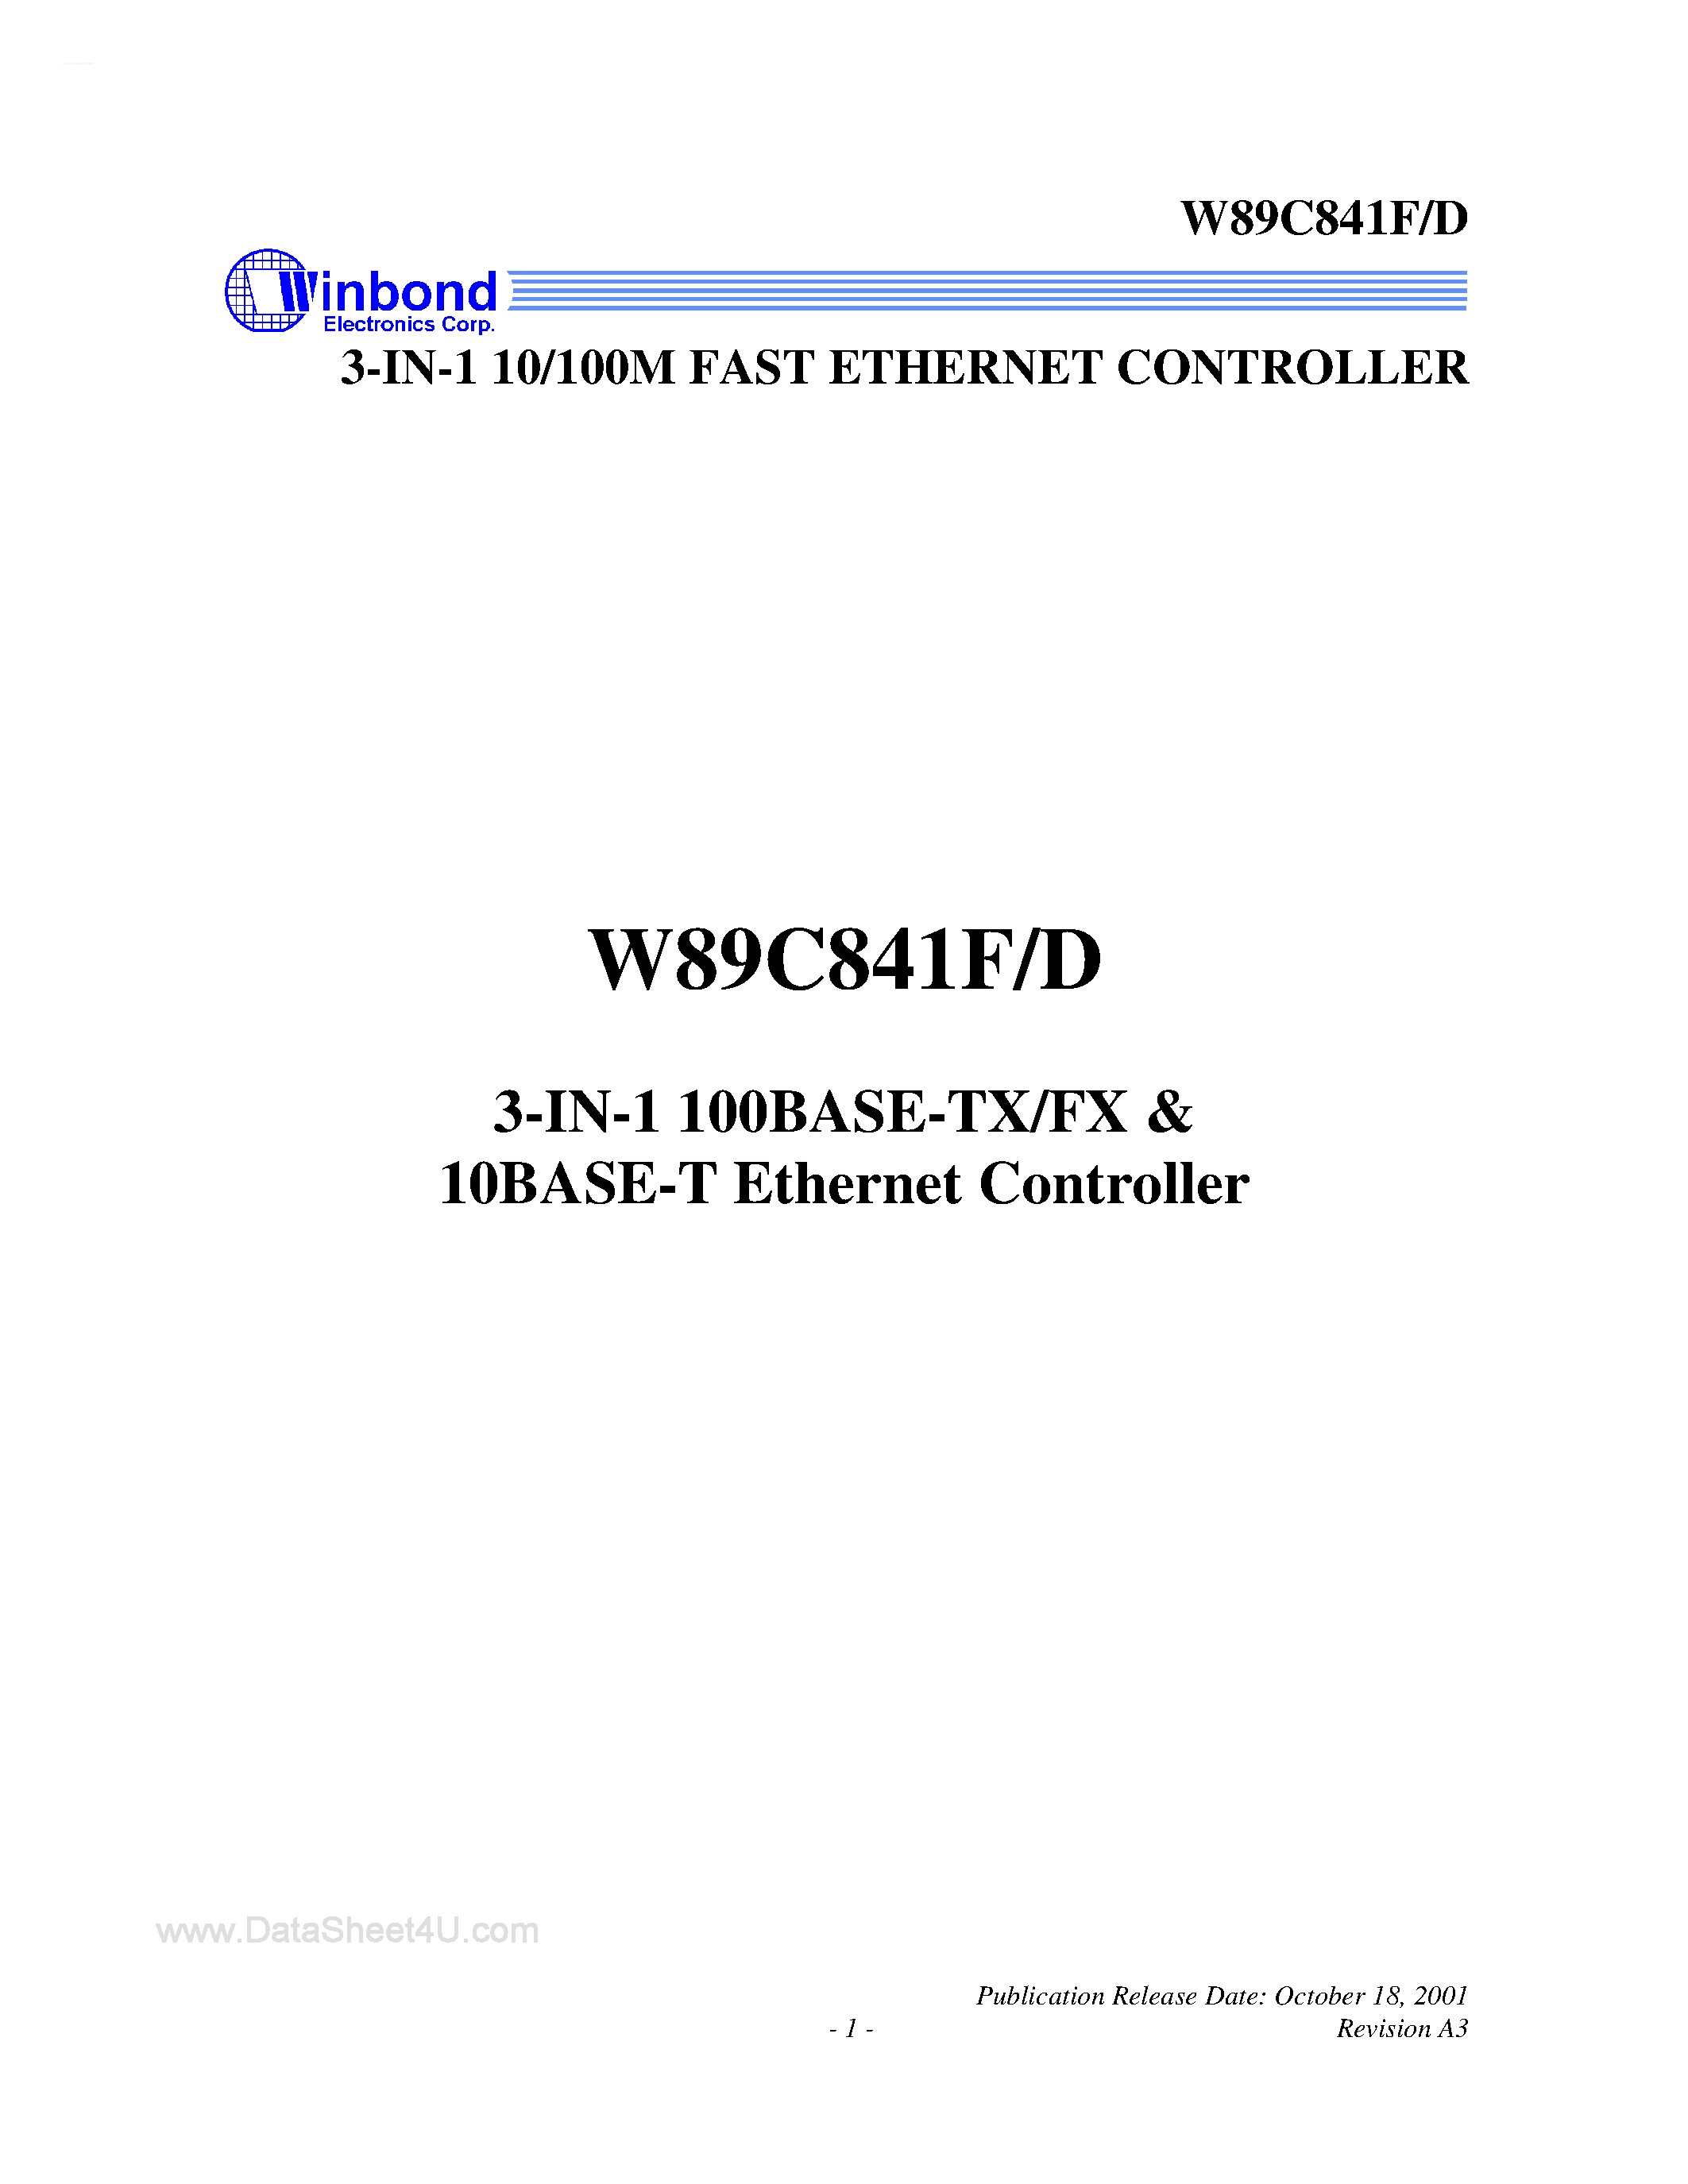 Даташит W89C841F - 3-IN - 1 10/100M FAST ETHERNET CONTROLLER страница 1